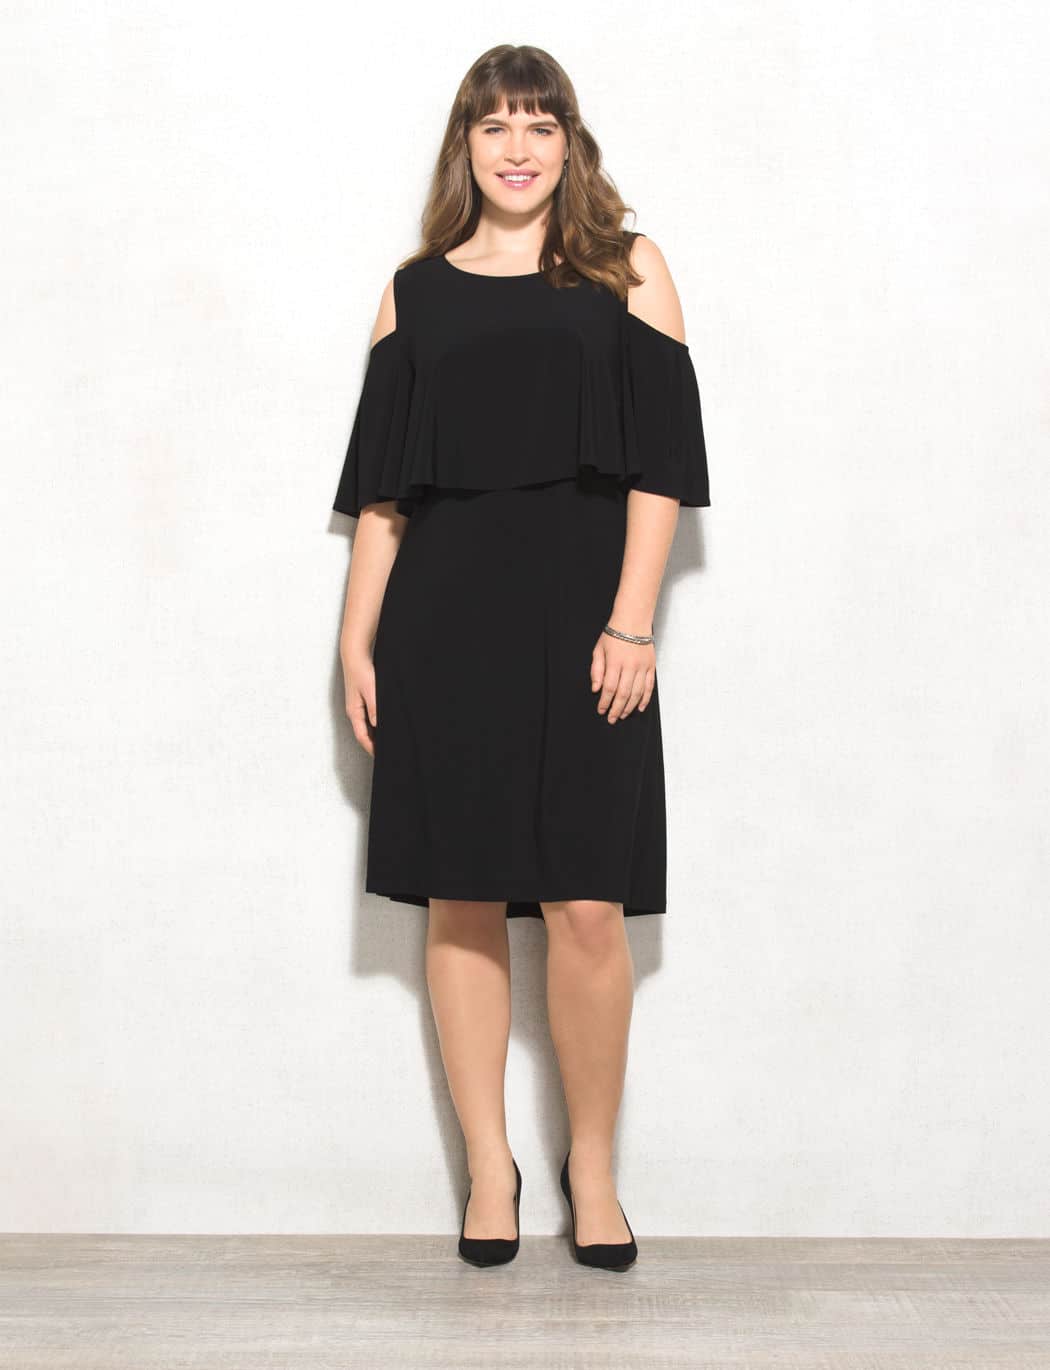 plus-size dresses - woman wearing black, off the shoulder holiday dress